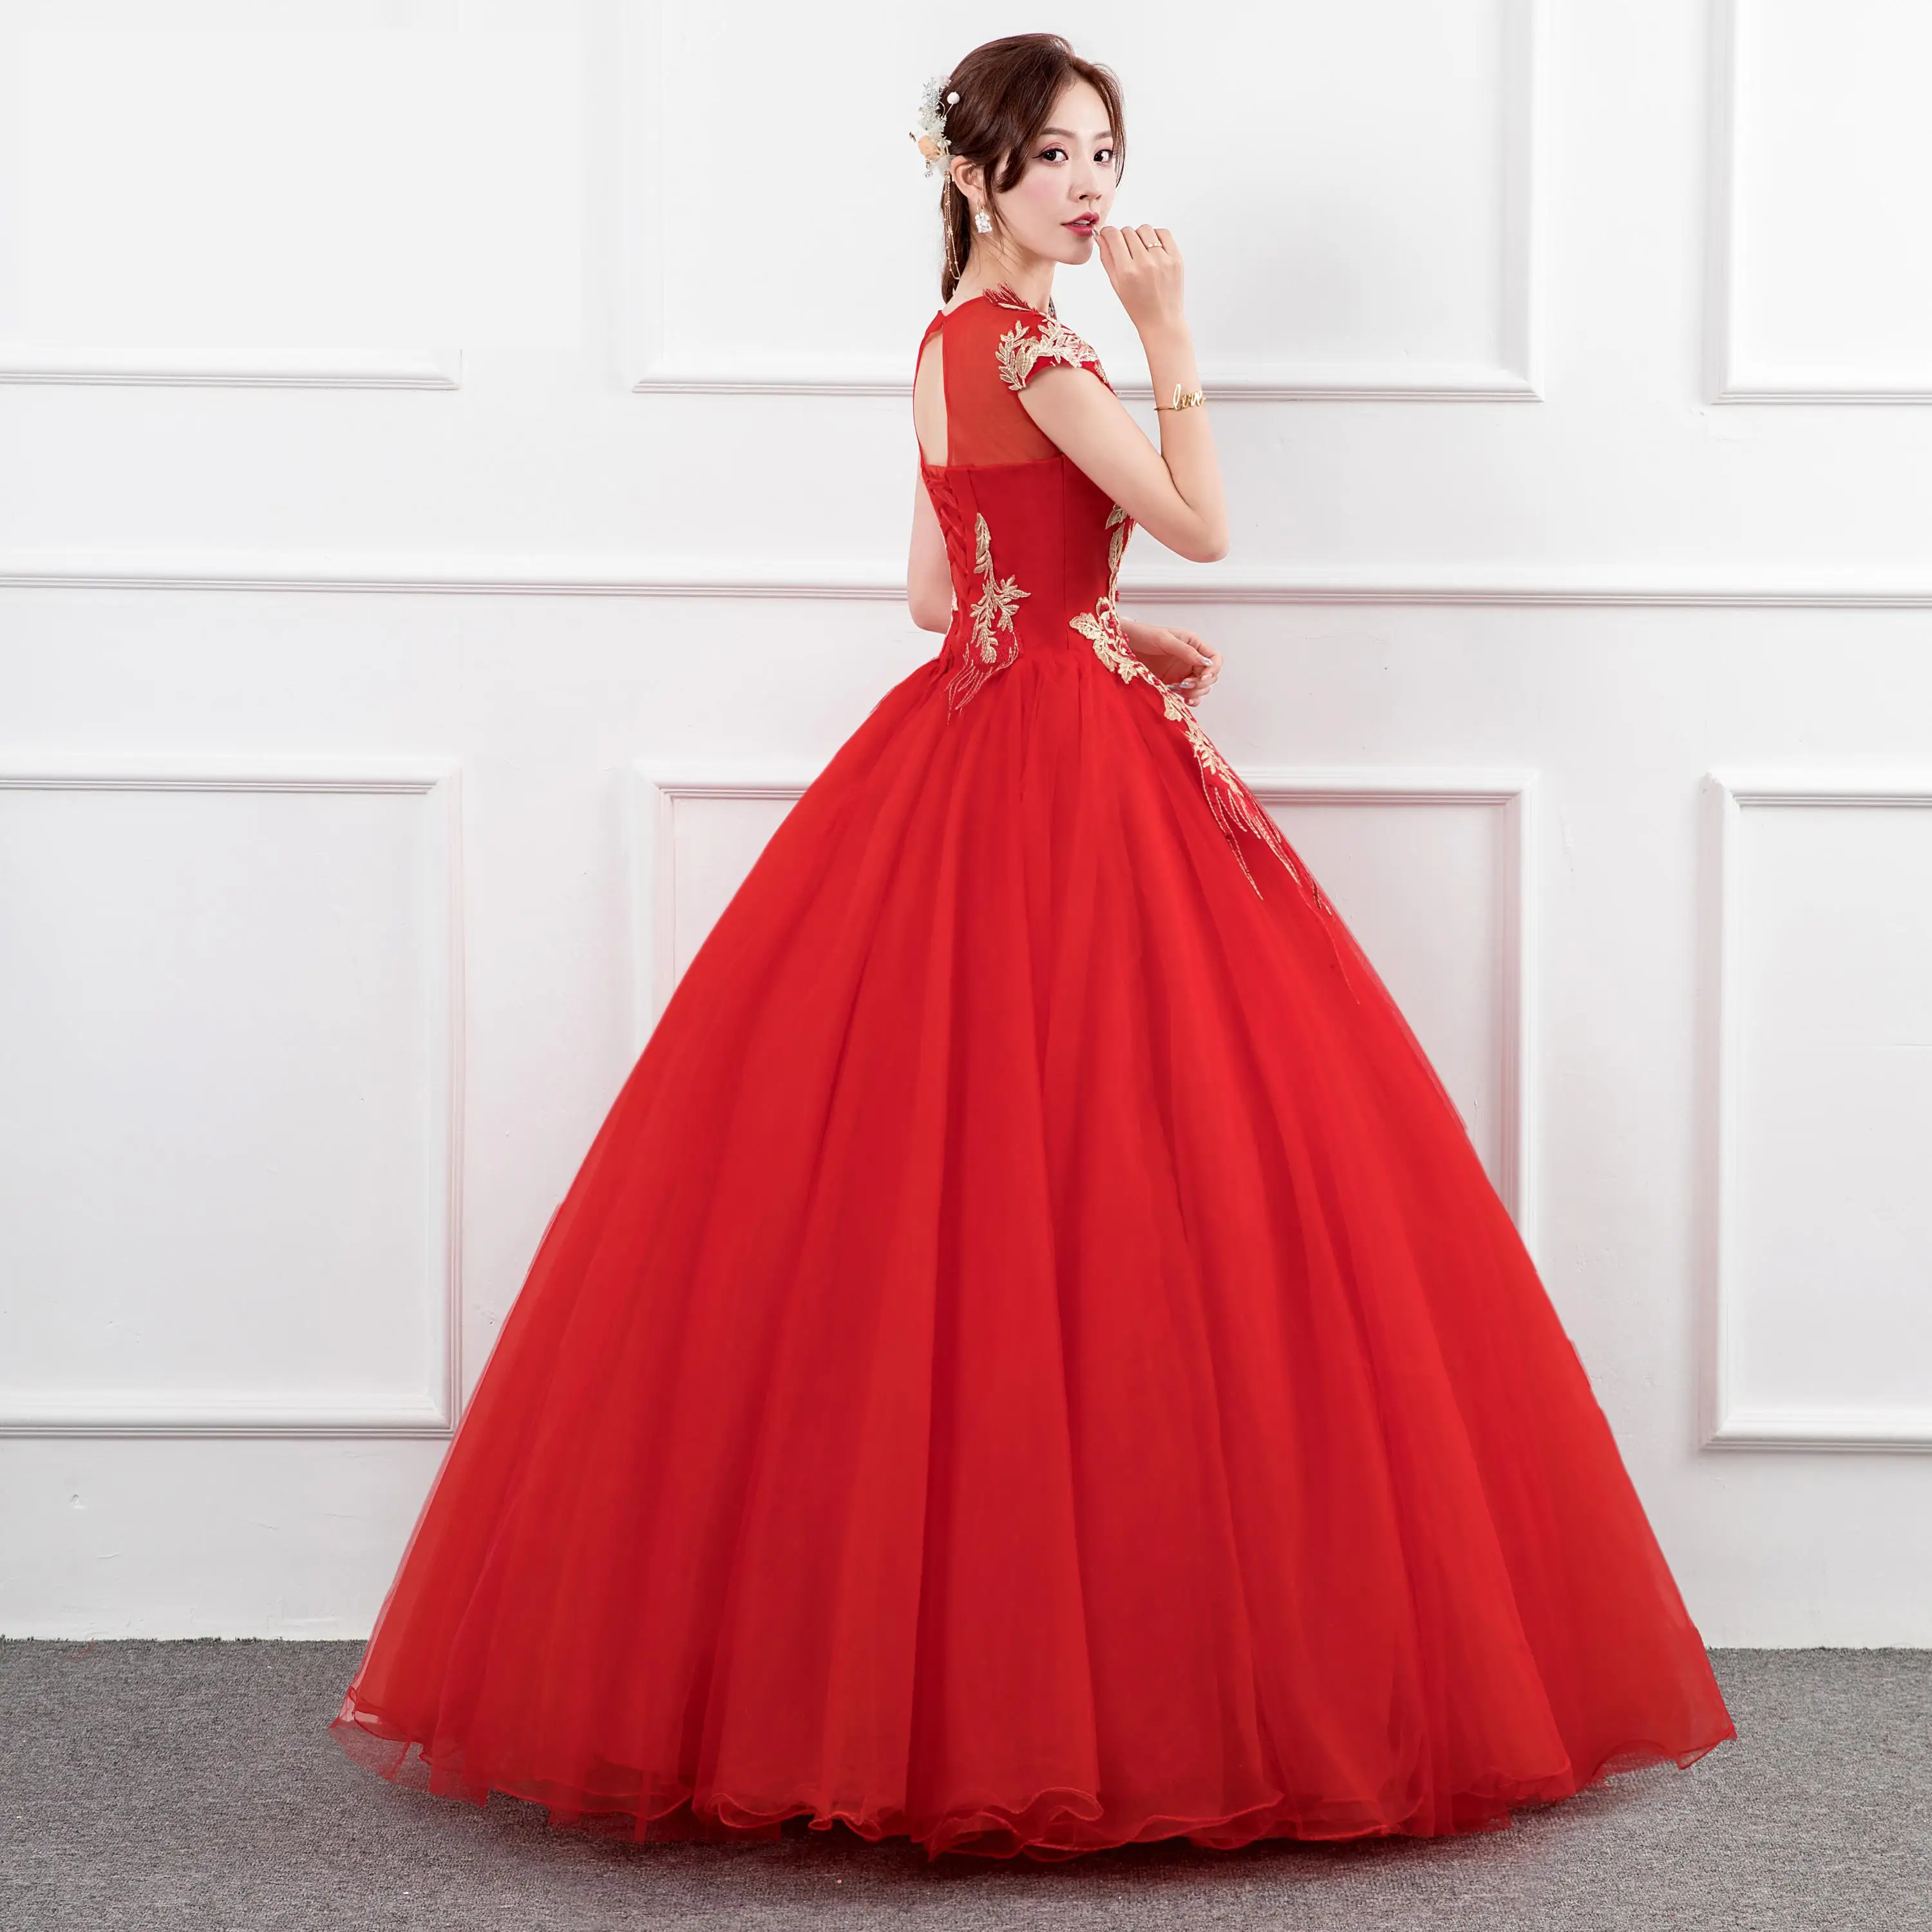 Red Quinceanera Dresses Gryffon Sequin Ball Gown Short Sleeve V-neck Party  Dress Vintage Prom Dress Plus Size Vestidos - Quinceanera Dresses -  AliExpress